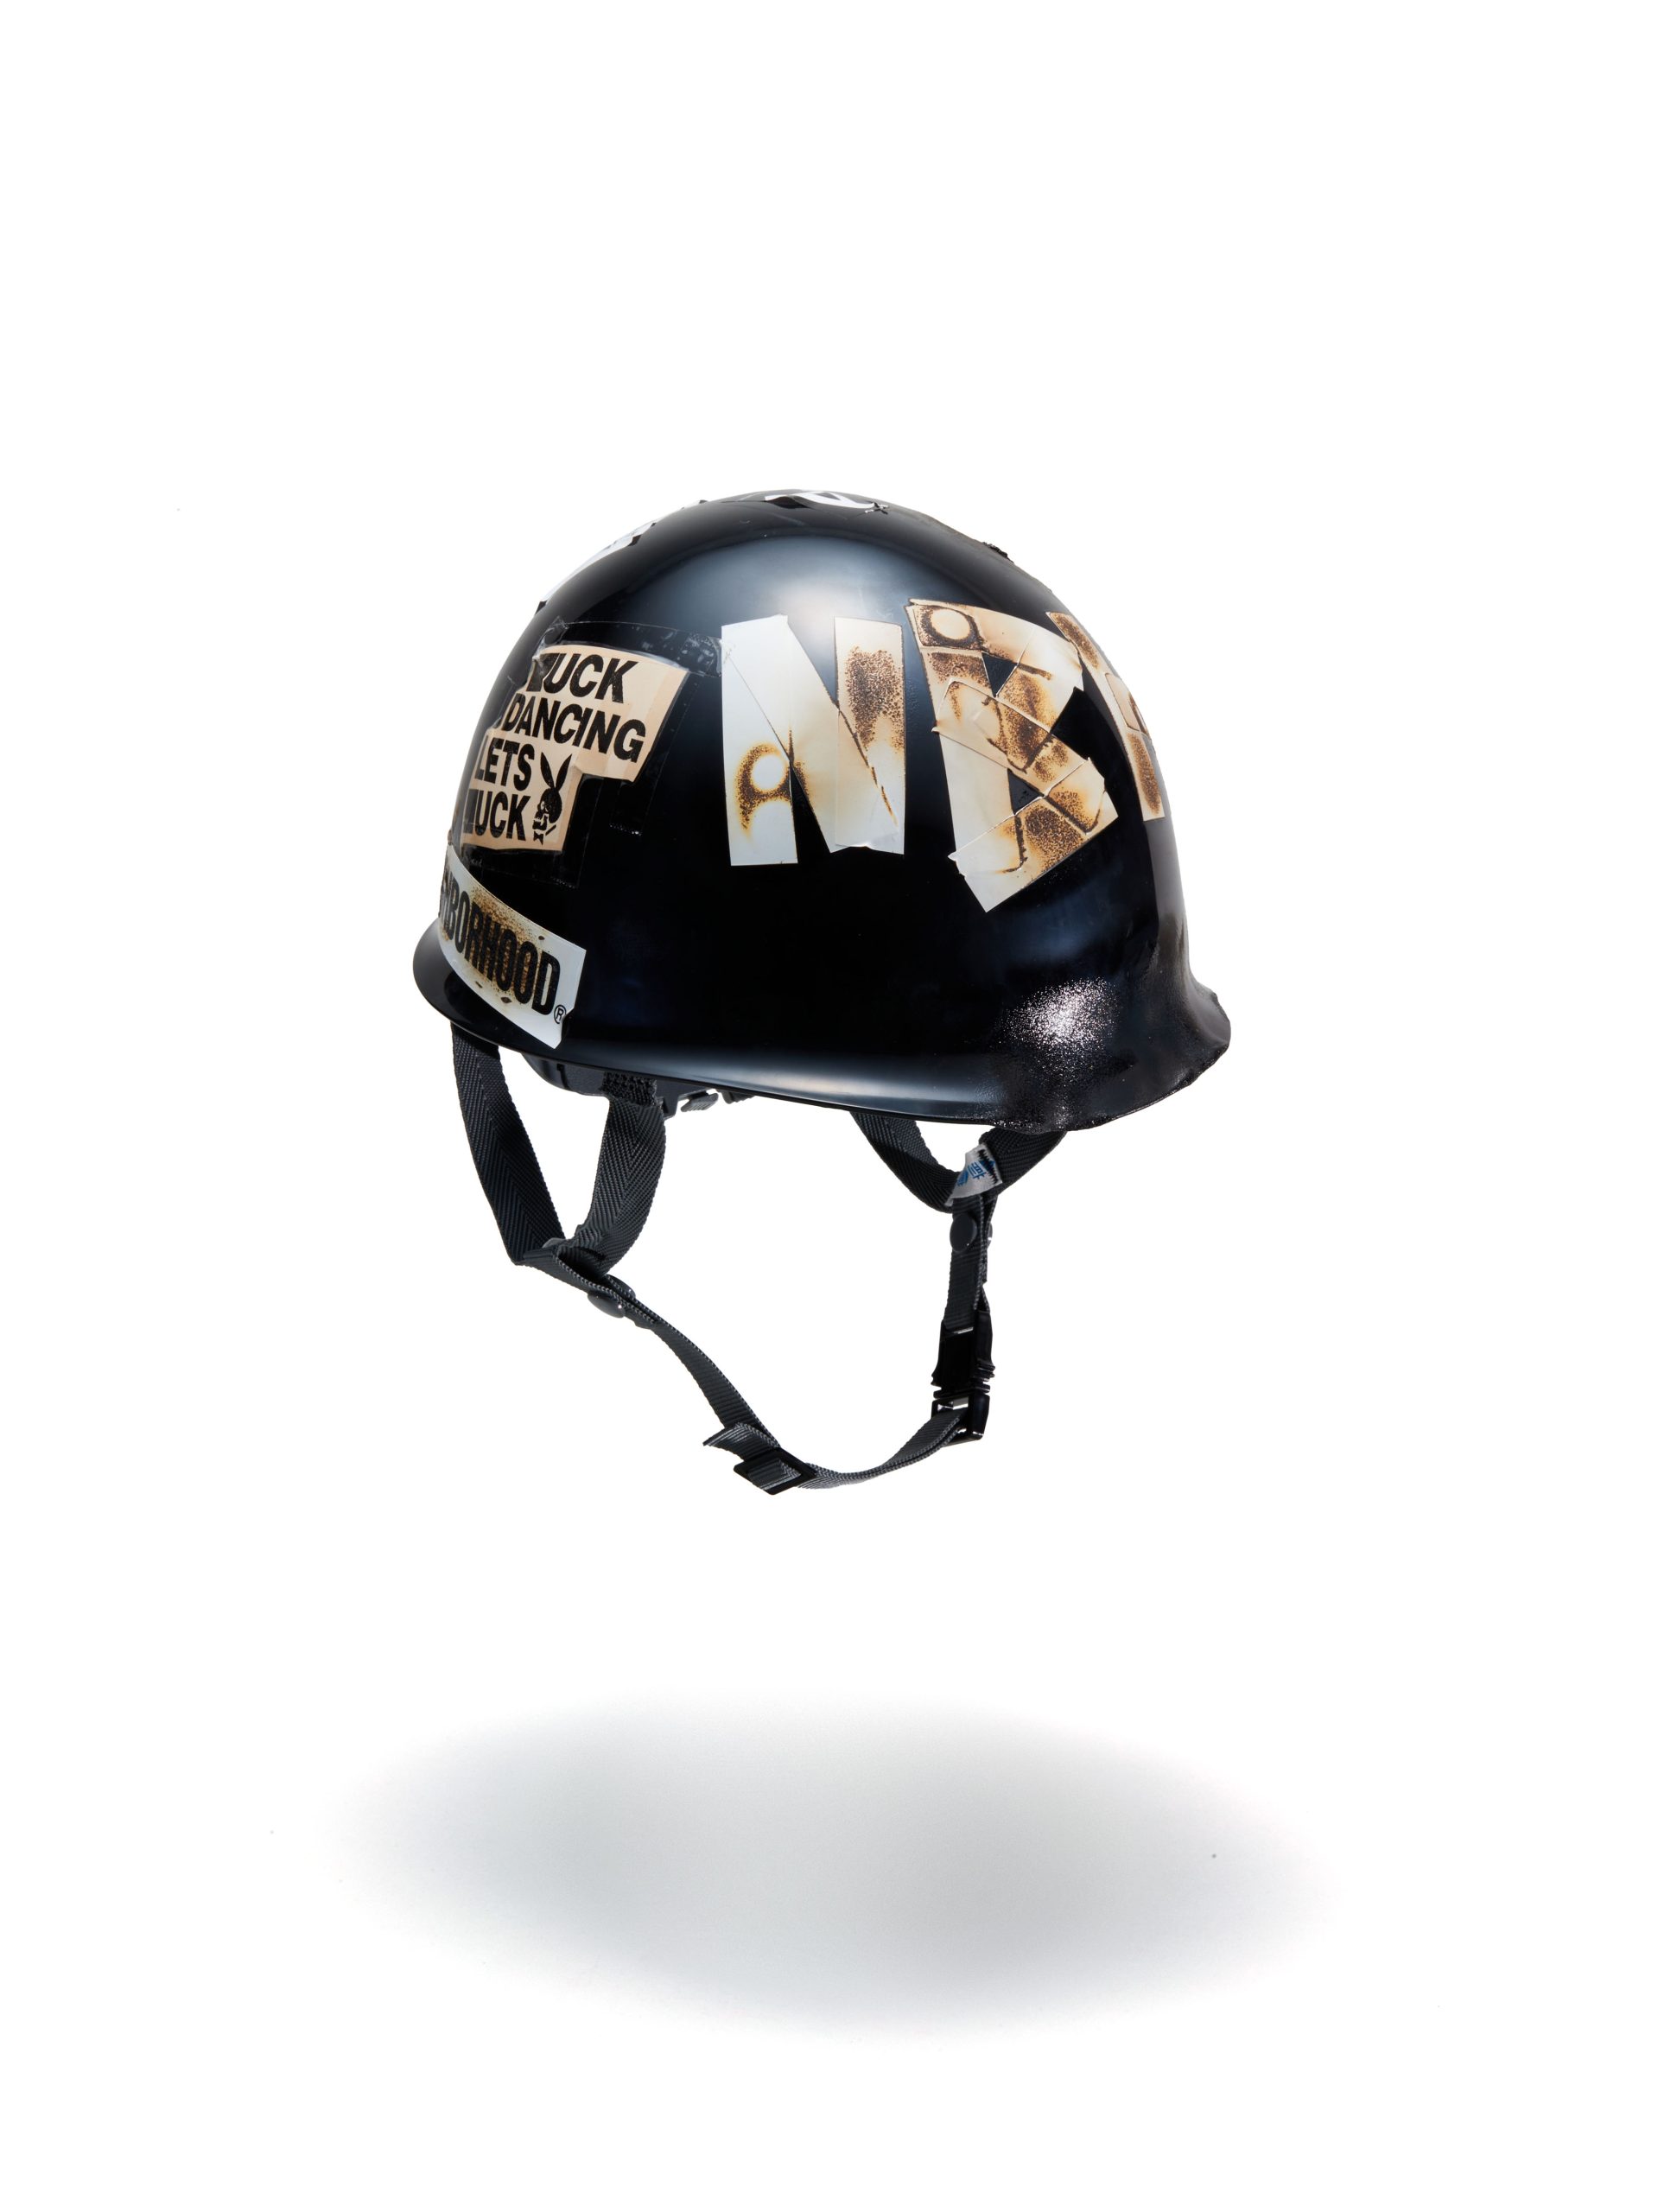 This collaboration also include a limited edition of 10 NEIGHBORHOOD helmets custom-made by JUN INAGAWA